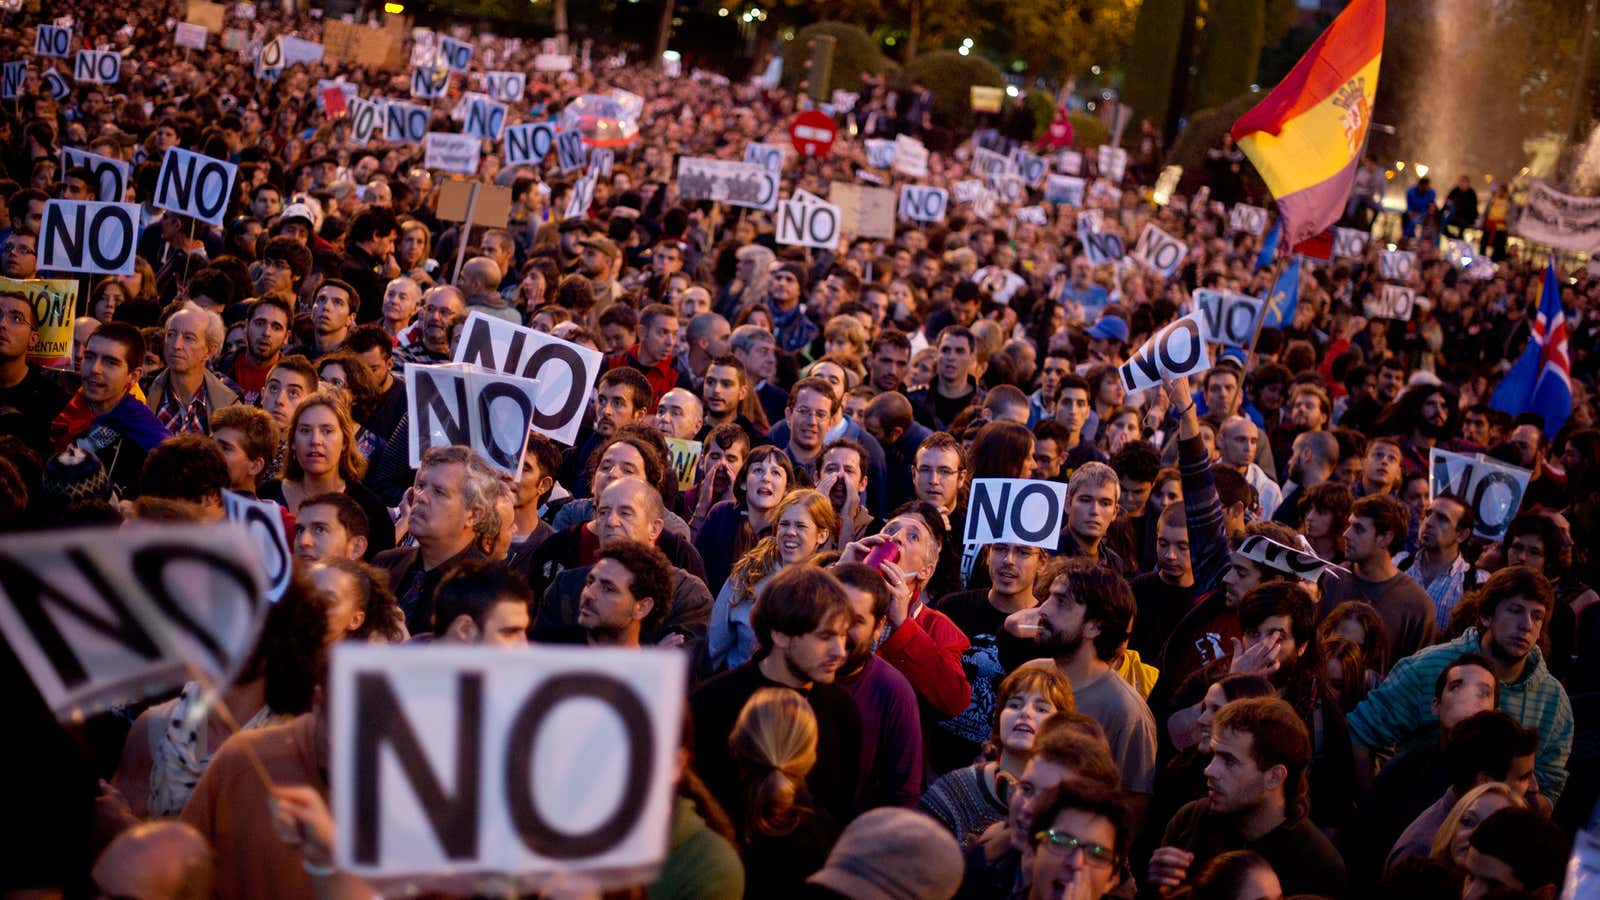 Spaniards protest austerity measures in Madrid, September 2012.